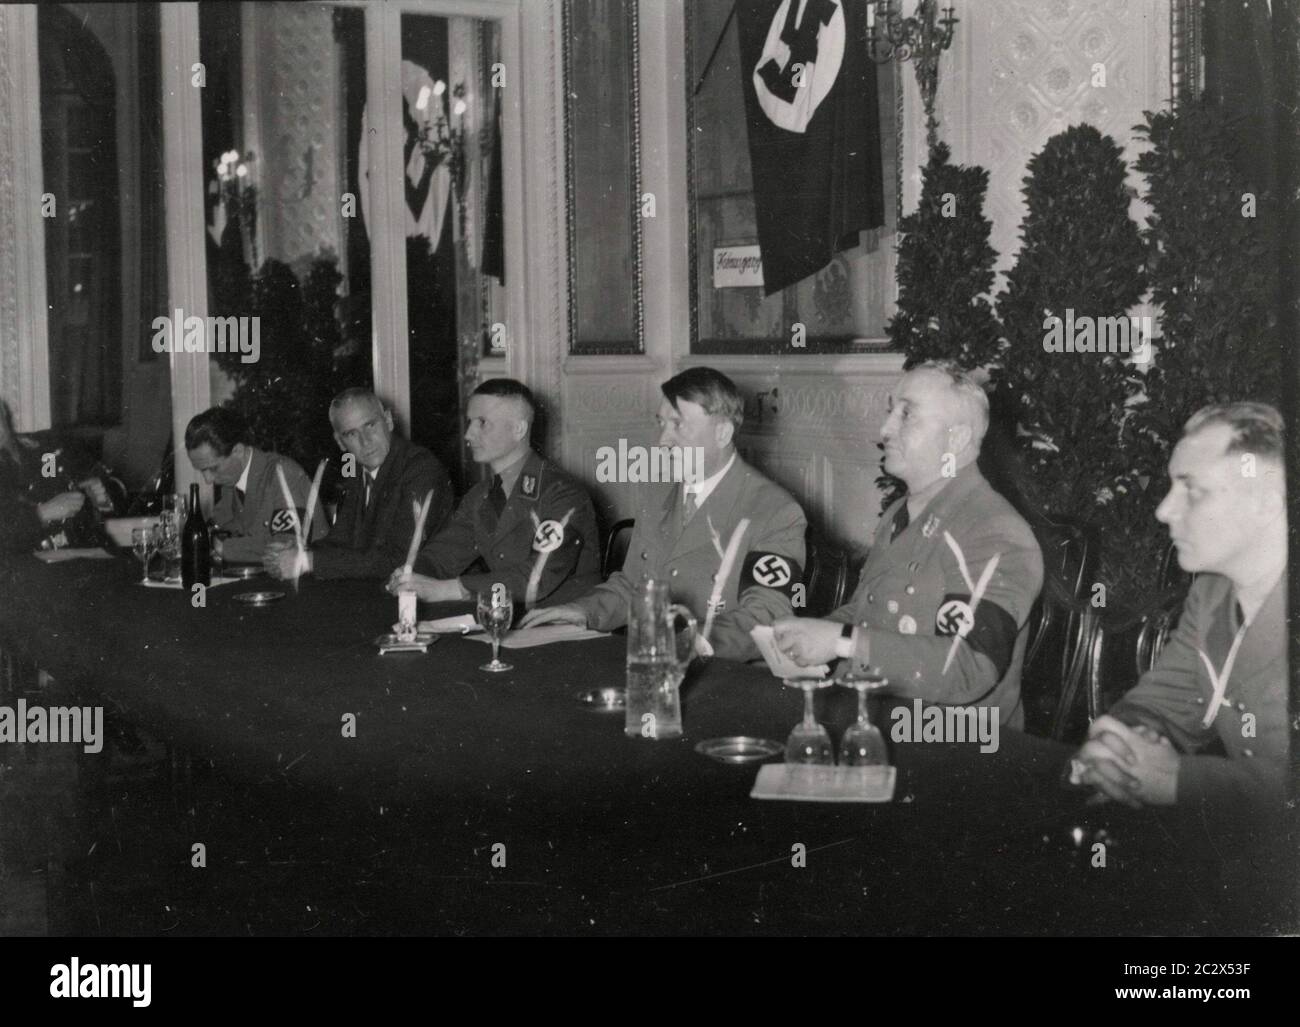 Conference - Goebbels, Frick, Gauleiter Wagner, Baden; Hitler, Ley, Bormann, Marti Heinrich Hoffmann Photographs 1933 Adolf Hitler's official photographer, and a Nazi politician and publisher, who was a member of Hitler's intimate circle. Stock Photo